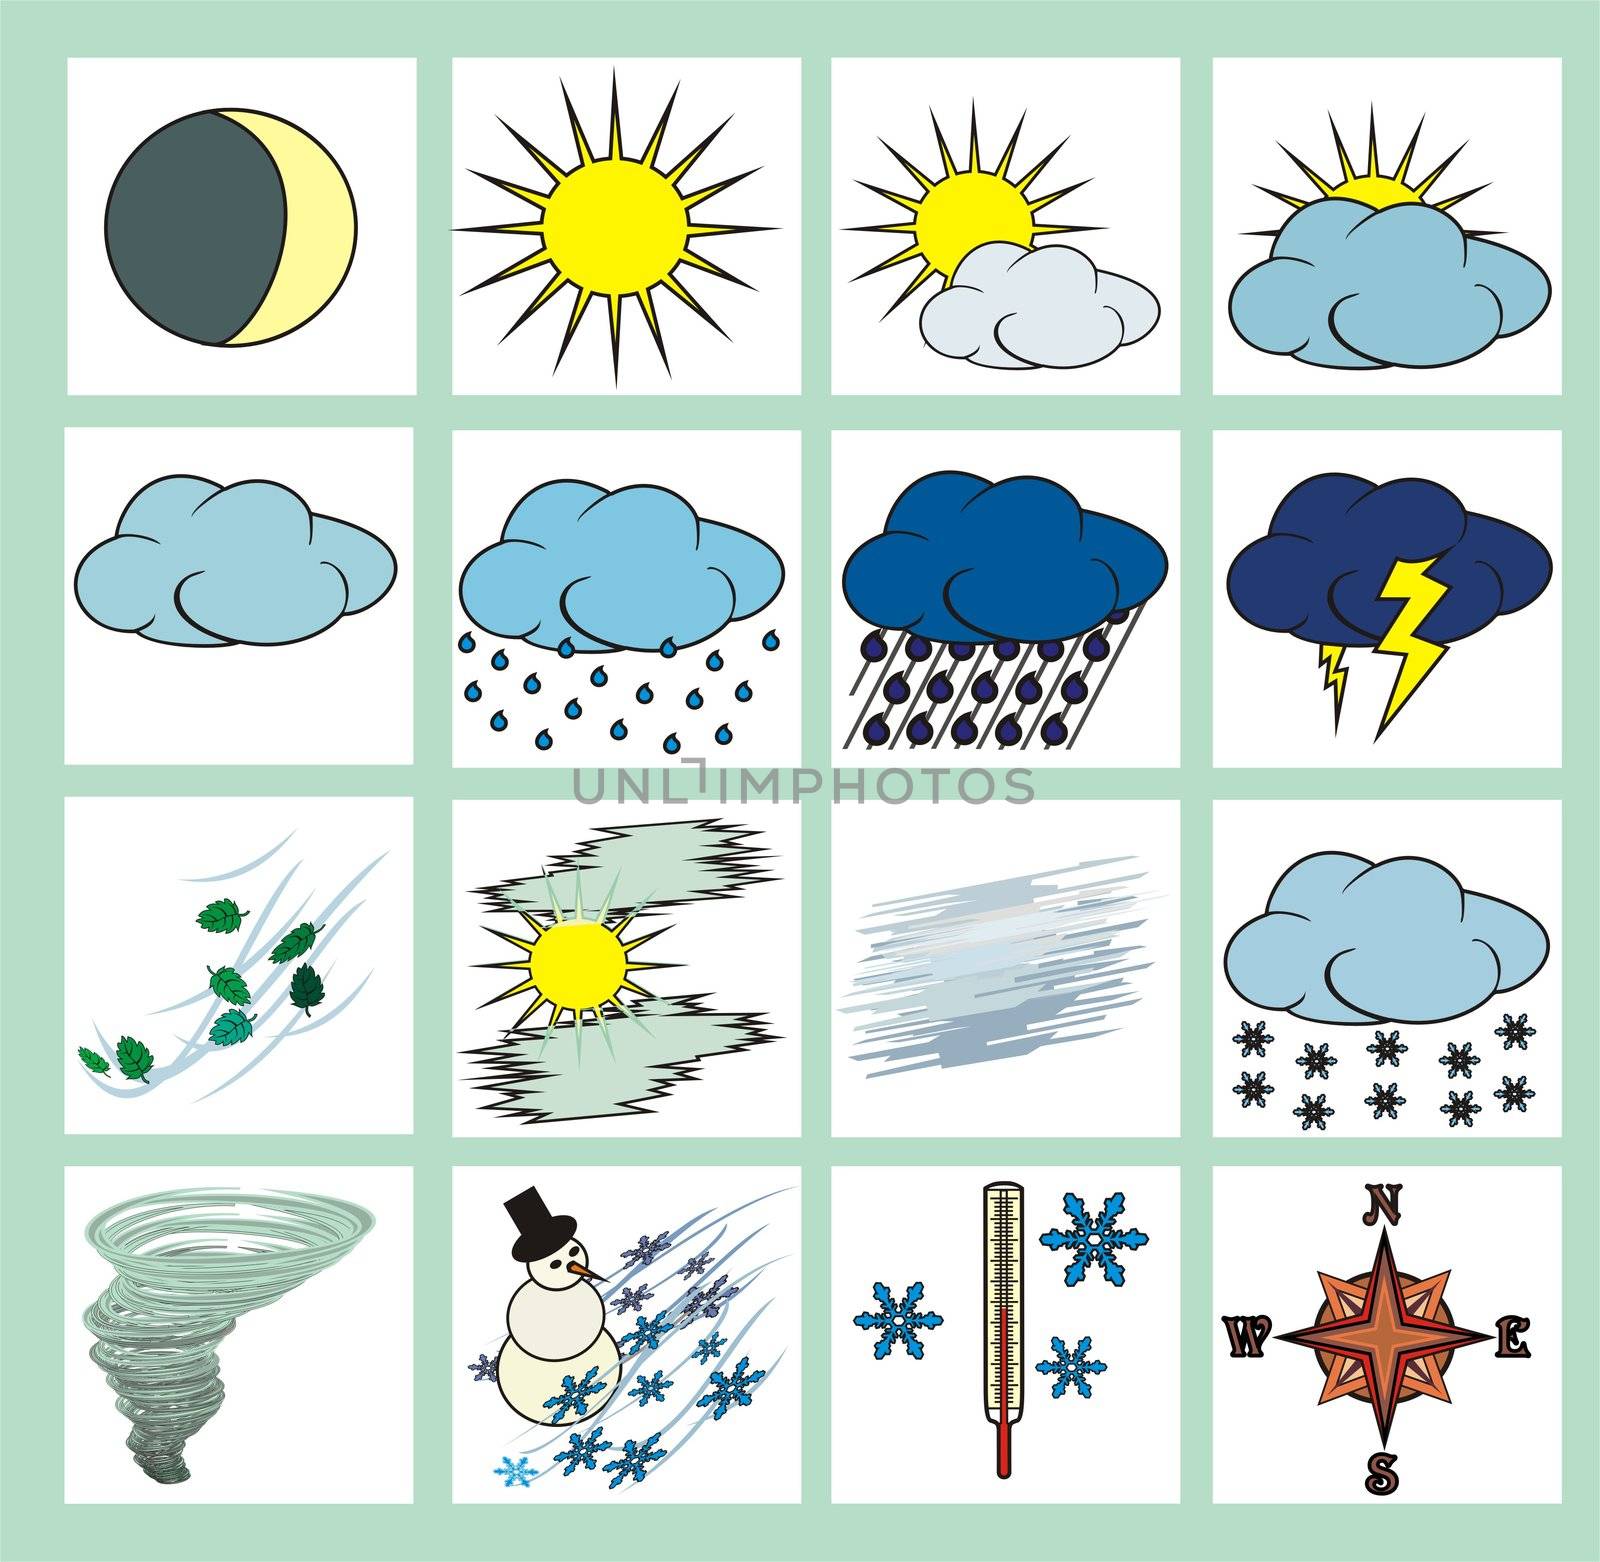 Weather icons or cliparts color with black outlines on white background